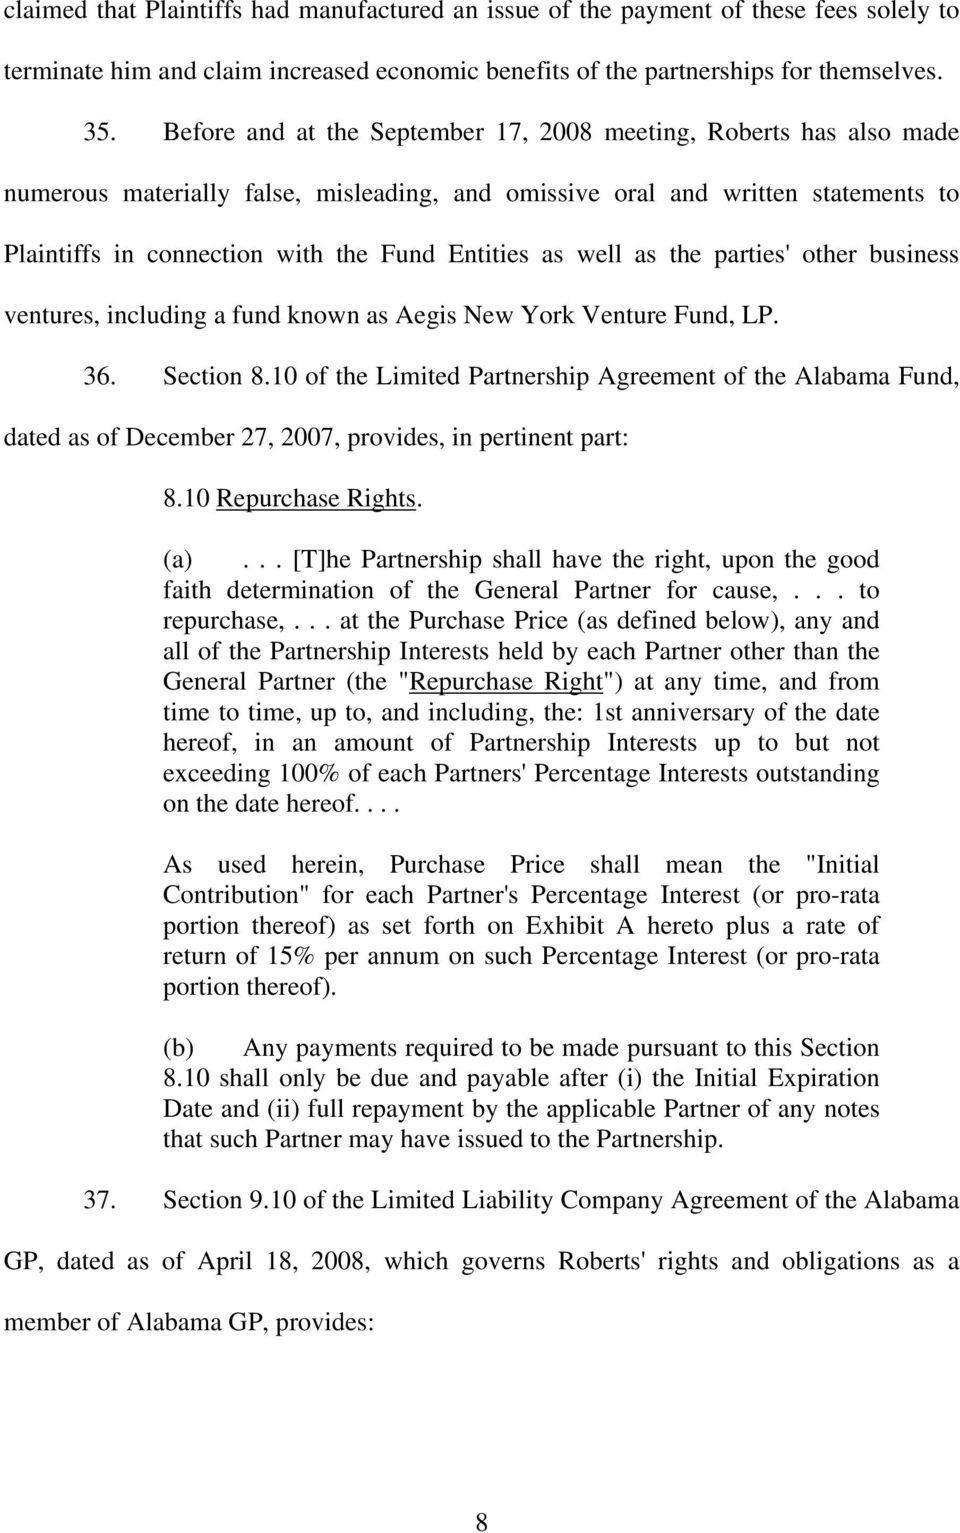 as well as the parties' other business ventures, including a fund known as Aegis New York Venture Fund, LP. 36. Section 8.